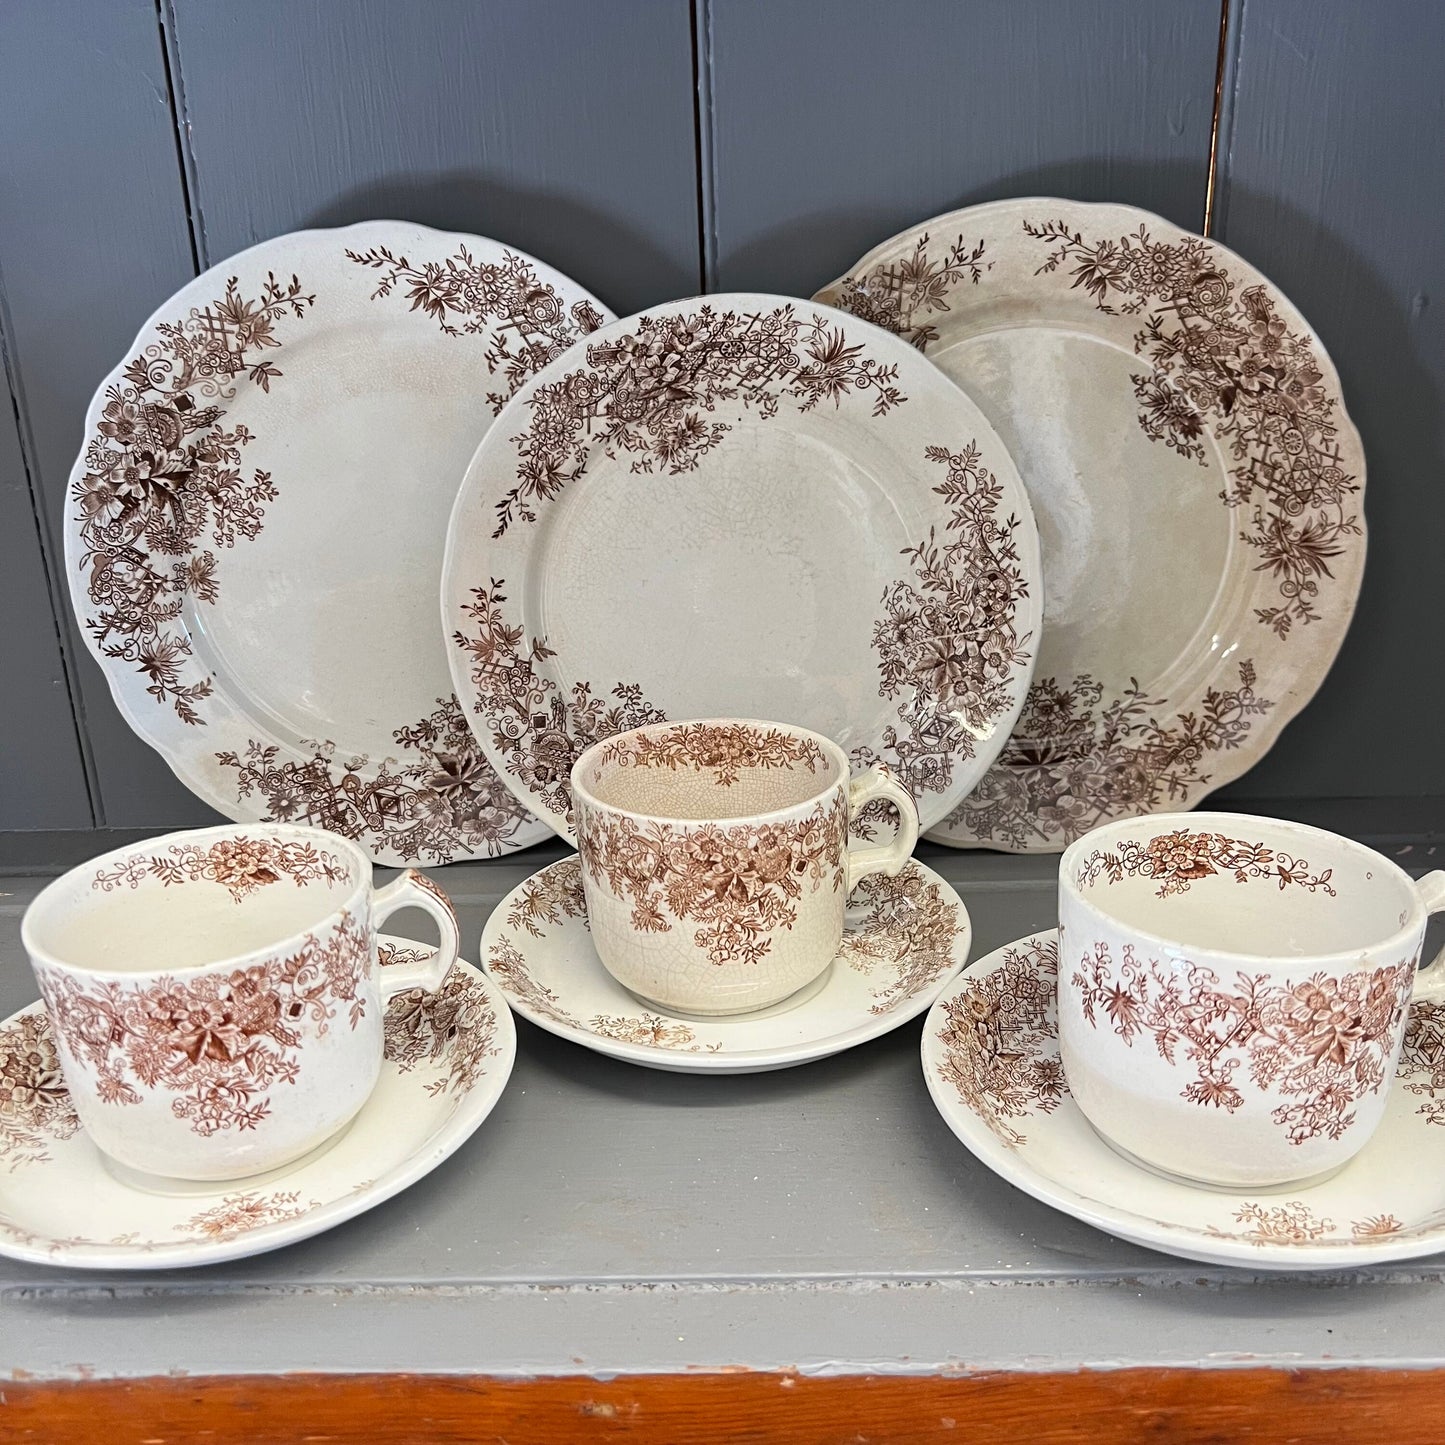 Venice Pattern Brown Transferware Smith Ford & Jones England Cup and Saucer English Ironstone